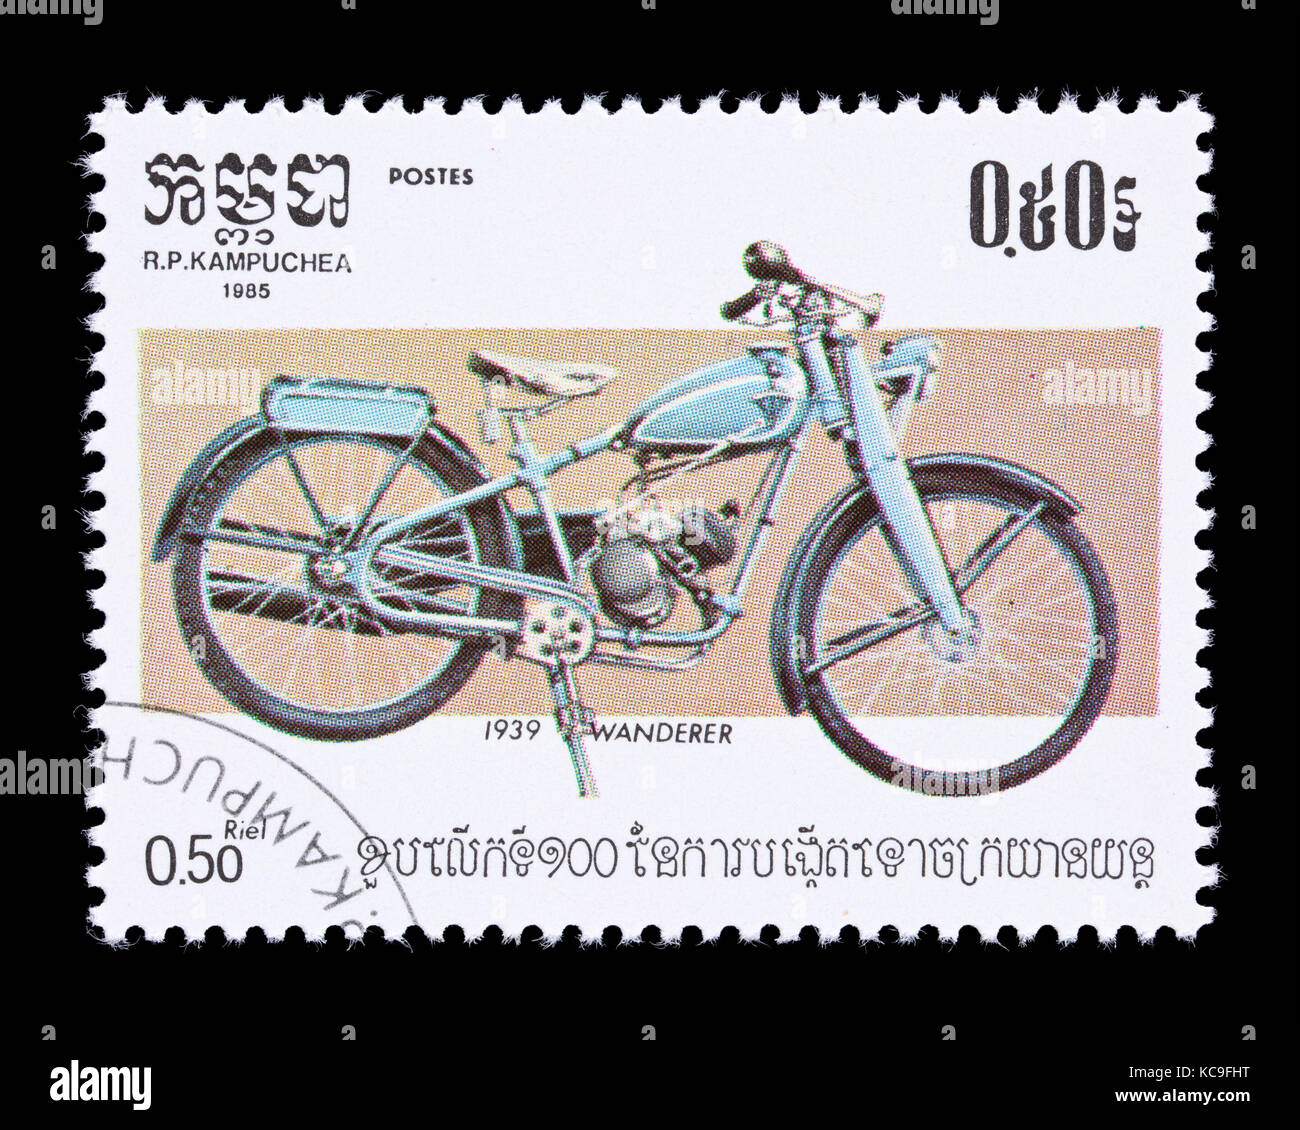 Postage stamp from Cambodia (Kampuchea) depicting a 1939 Wanderer motorcycle Stock Photo